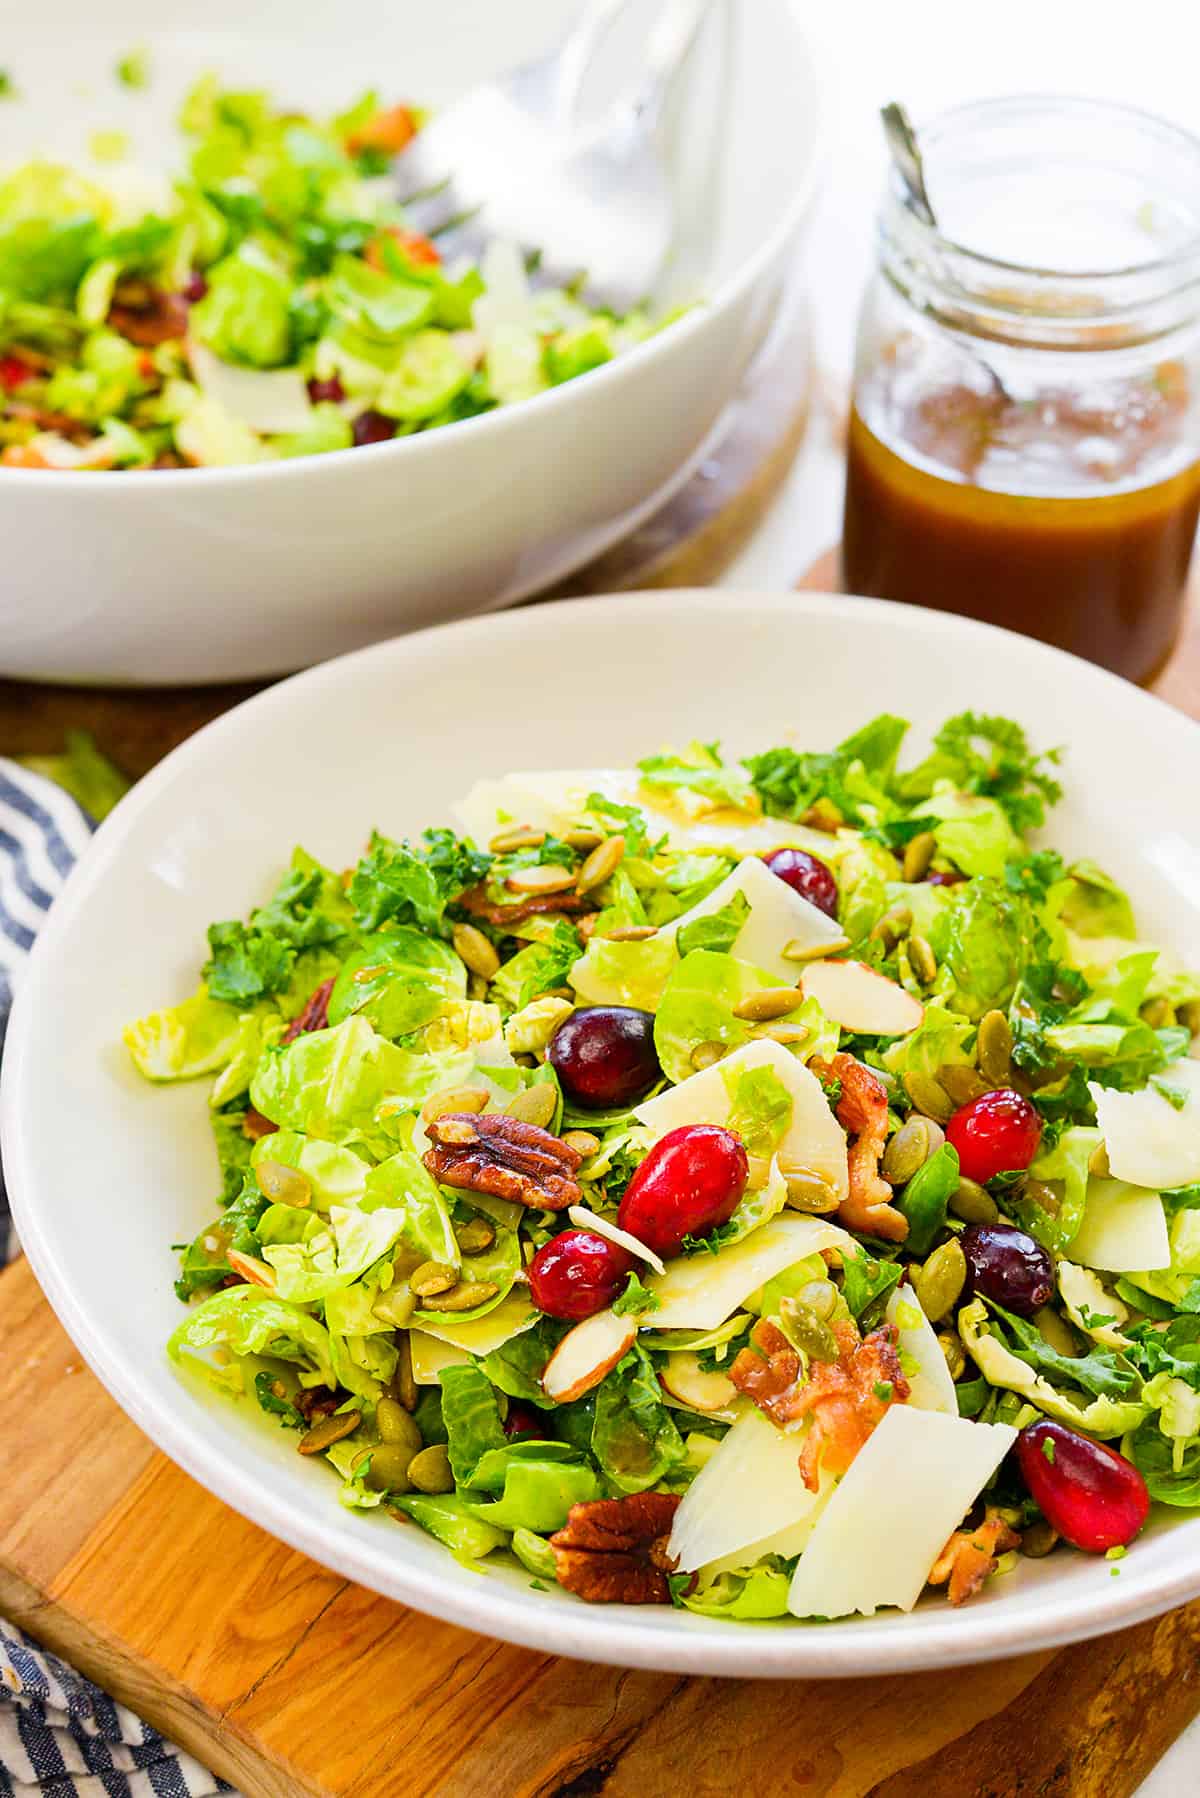 Brussels sprouts salad in white bowl.